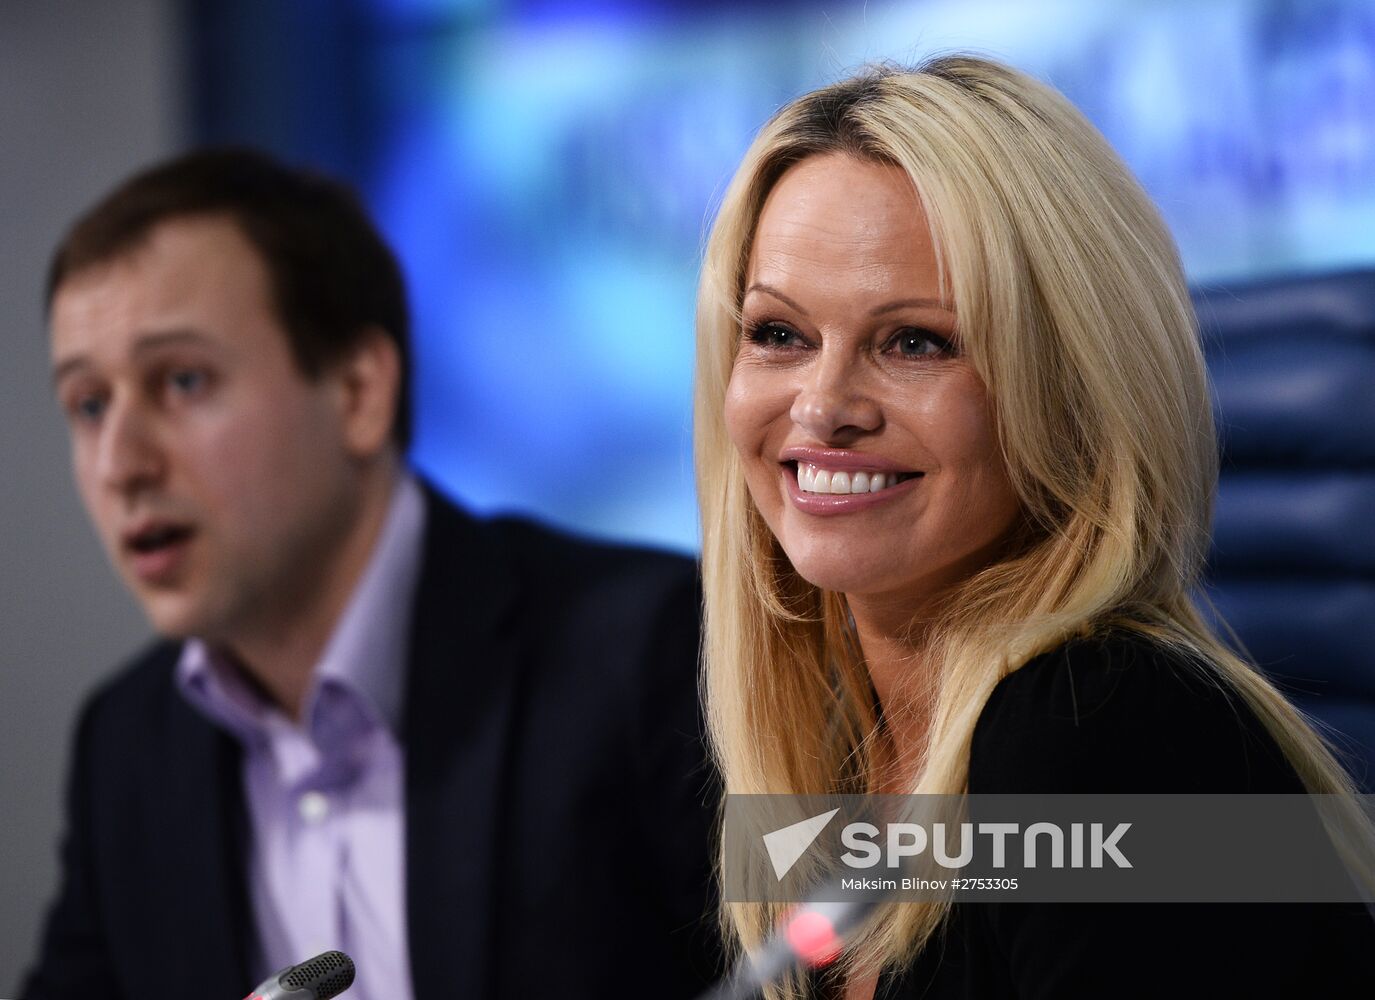 News conference with actress Pamela Anderson